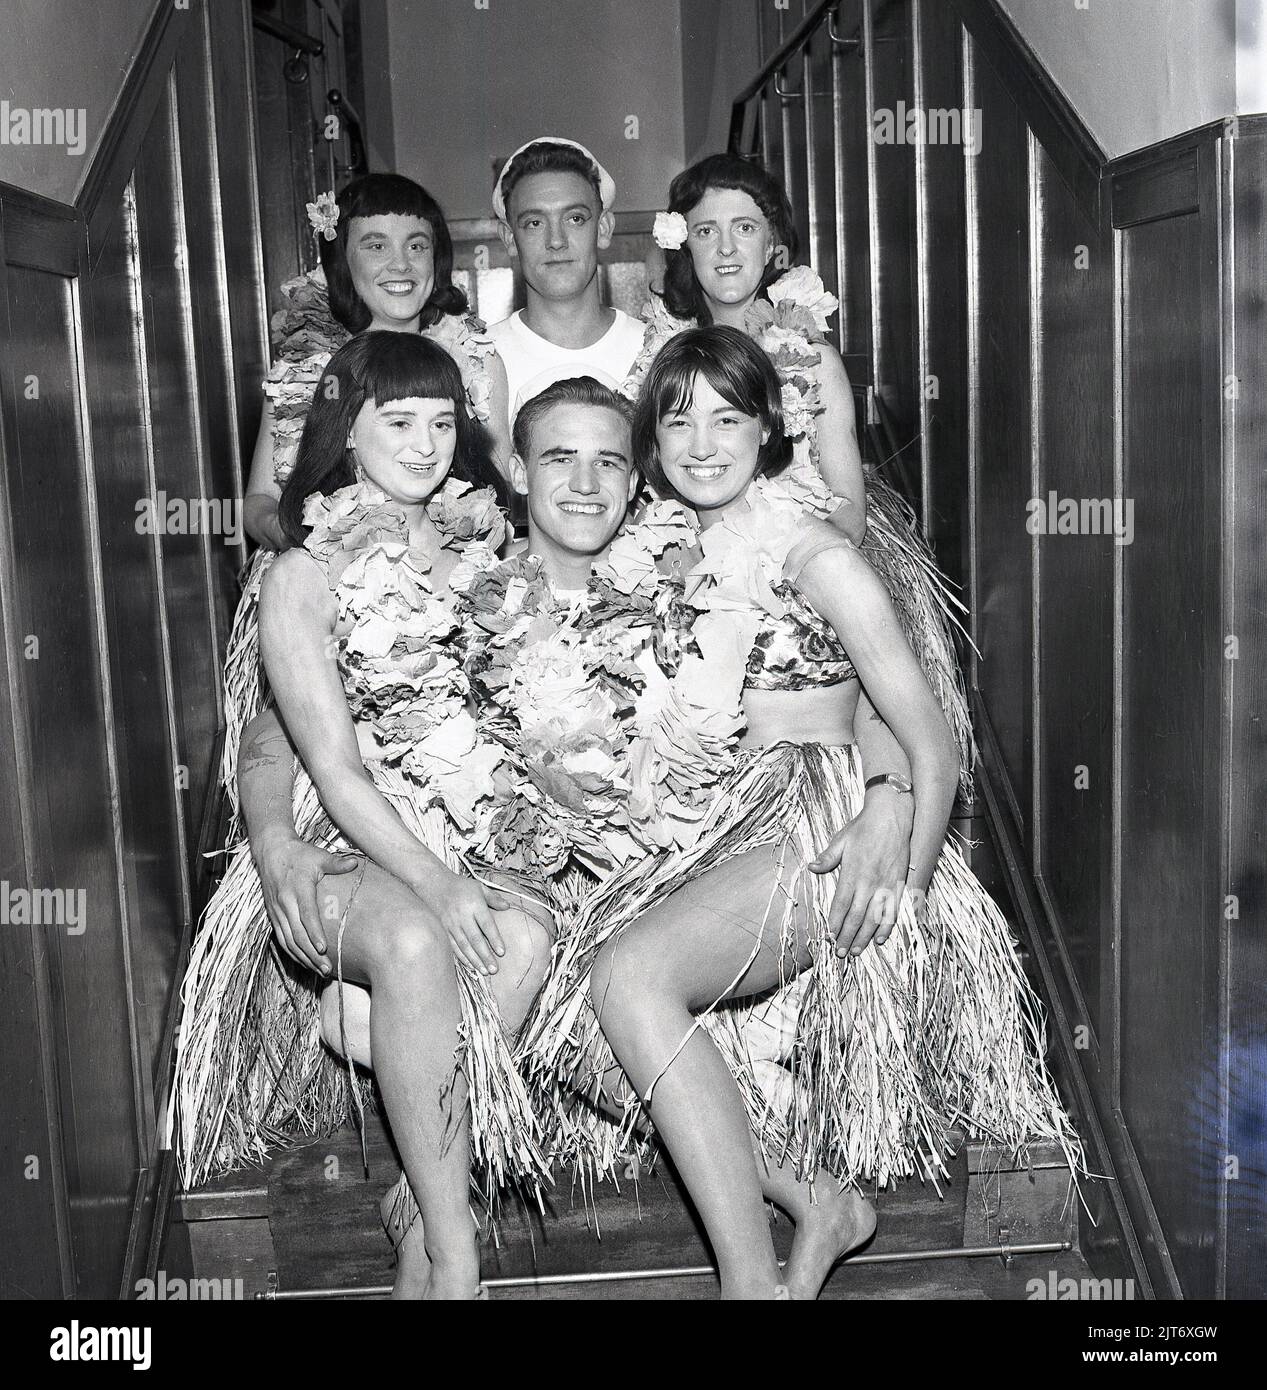 1965, historical, theatre production of South Pacific, backstage on a staircase, performers gather for a group photo, two happy 'sailors' with girls in grass skirts, Fife, Scotland, UK. South Pacific was a musical written by the hit partnership of Rodgers and Hammerstein, based on the book, Tales of the South Pacific and which premiered on Broadway in 1949. Stock Photo